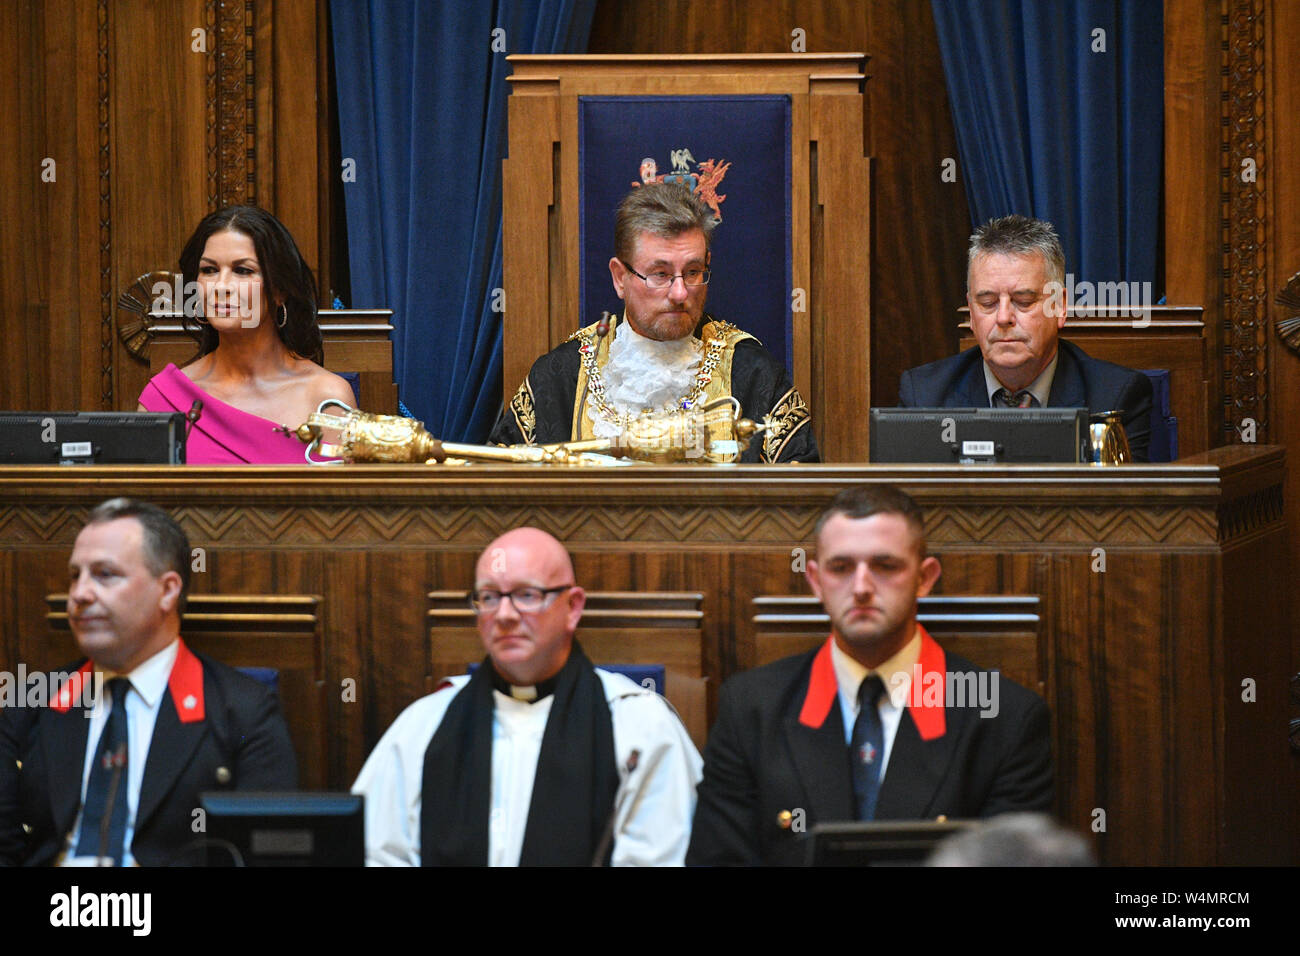 Catherine Zeta-Jones (back left) during a ceremony at the Guildhall, Swansea, where she is receiving the Honorary Freedom of the City and County of Swansea. Stock Photo